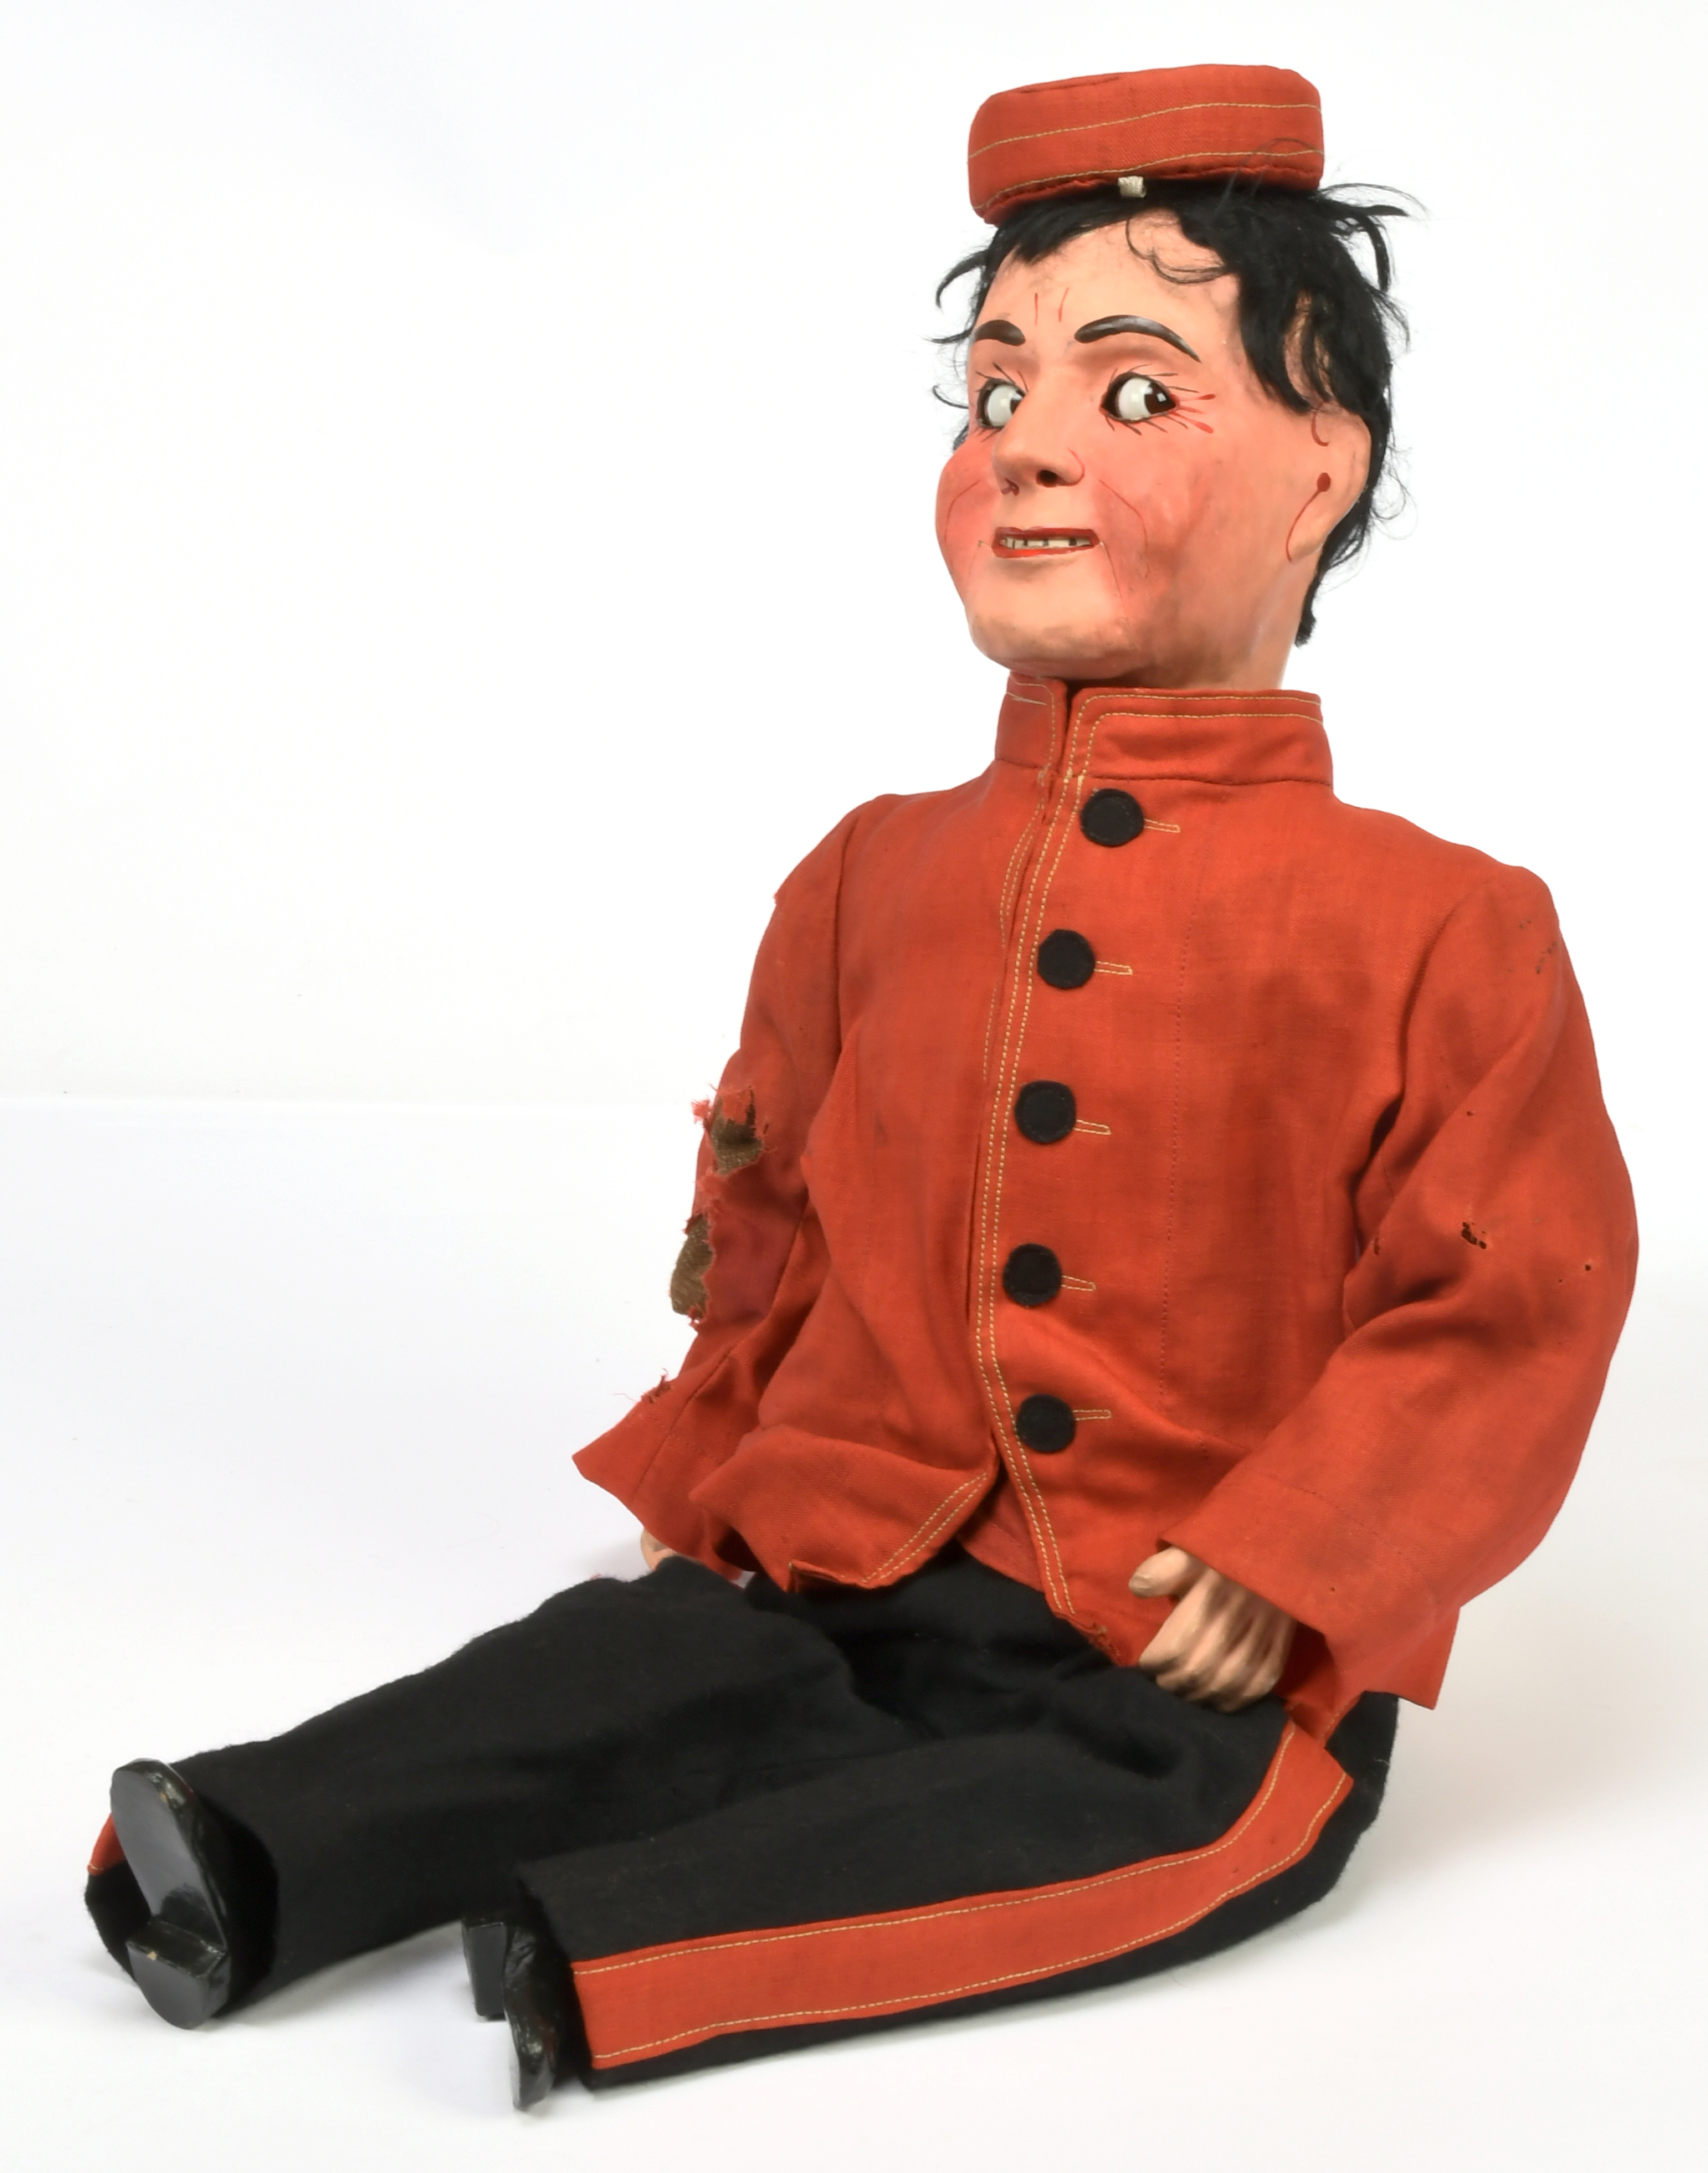 Herbert Brighton for Gamages ventriloquist dummy/knee figure with costumes and pamphlets 